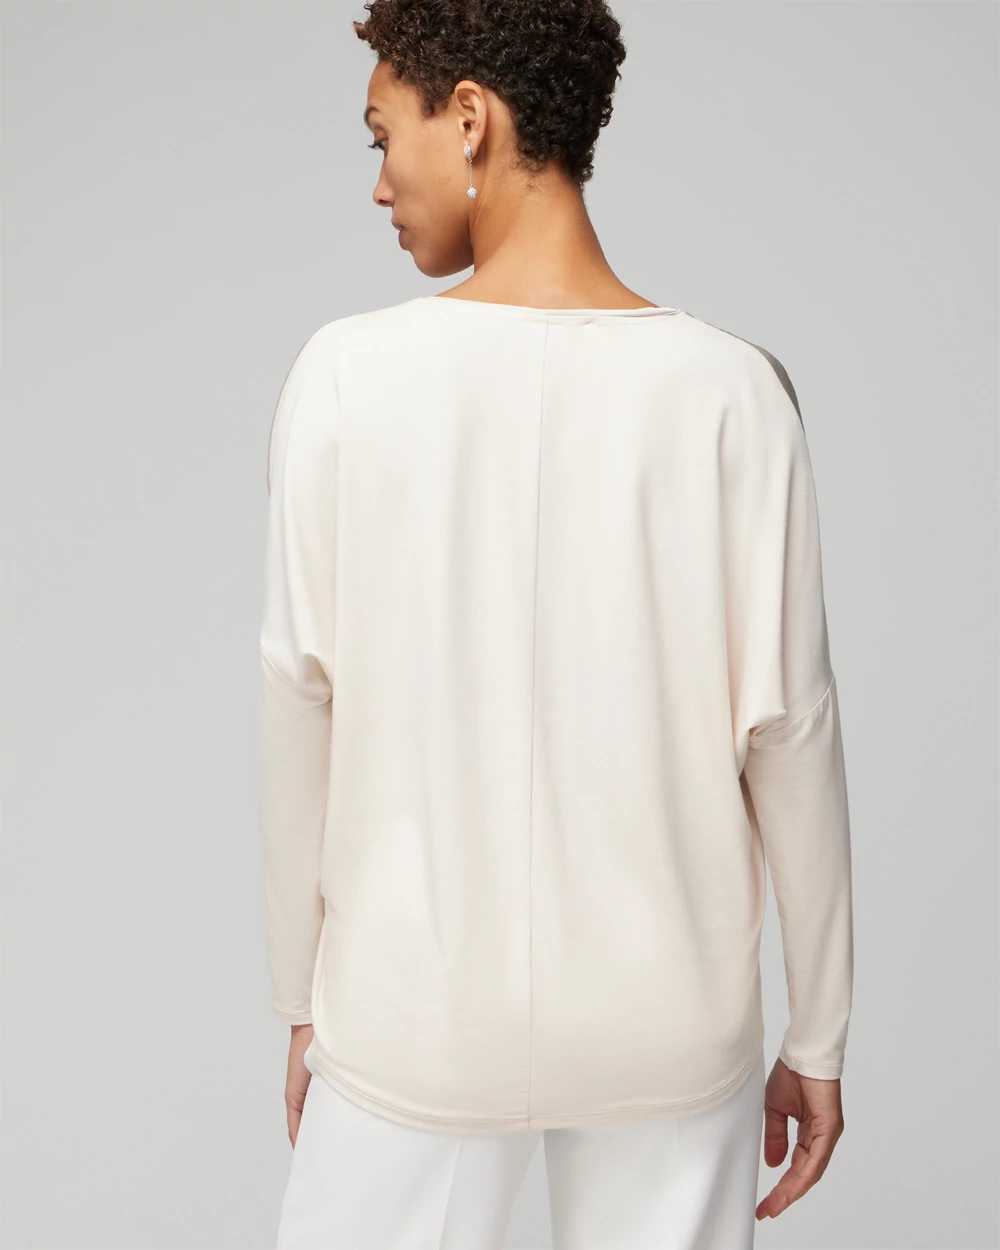 Woven Front Long Sleeve Tee click to view larger image.